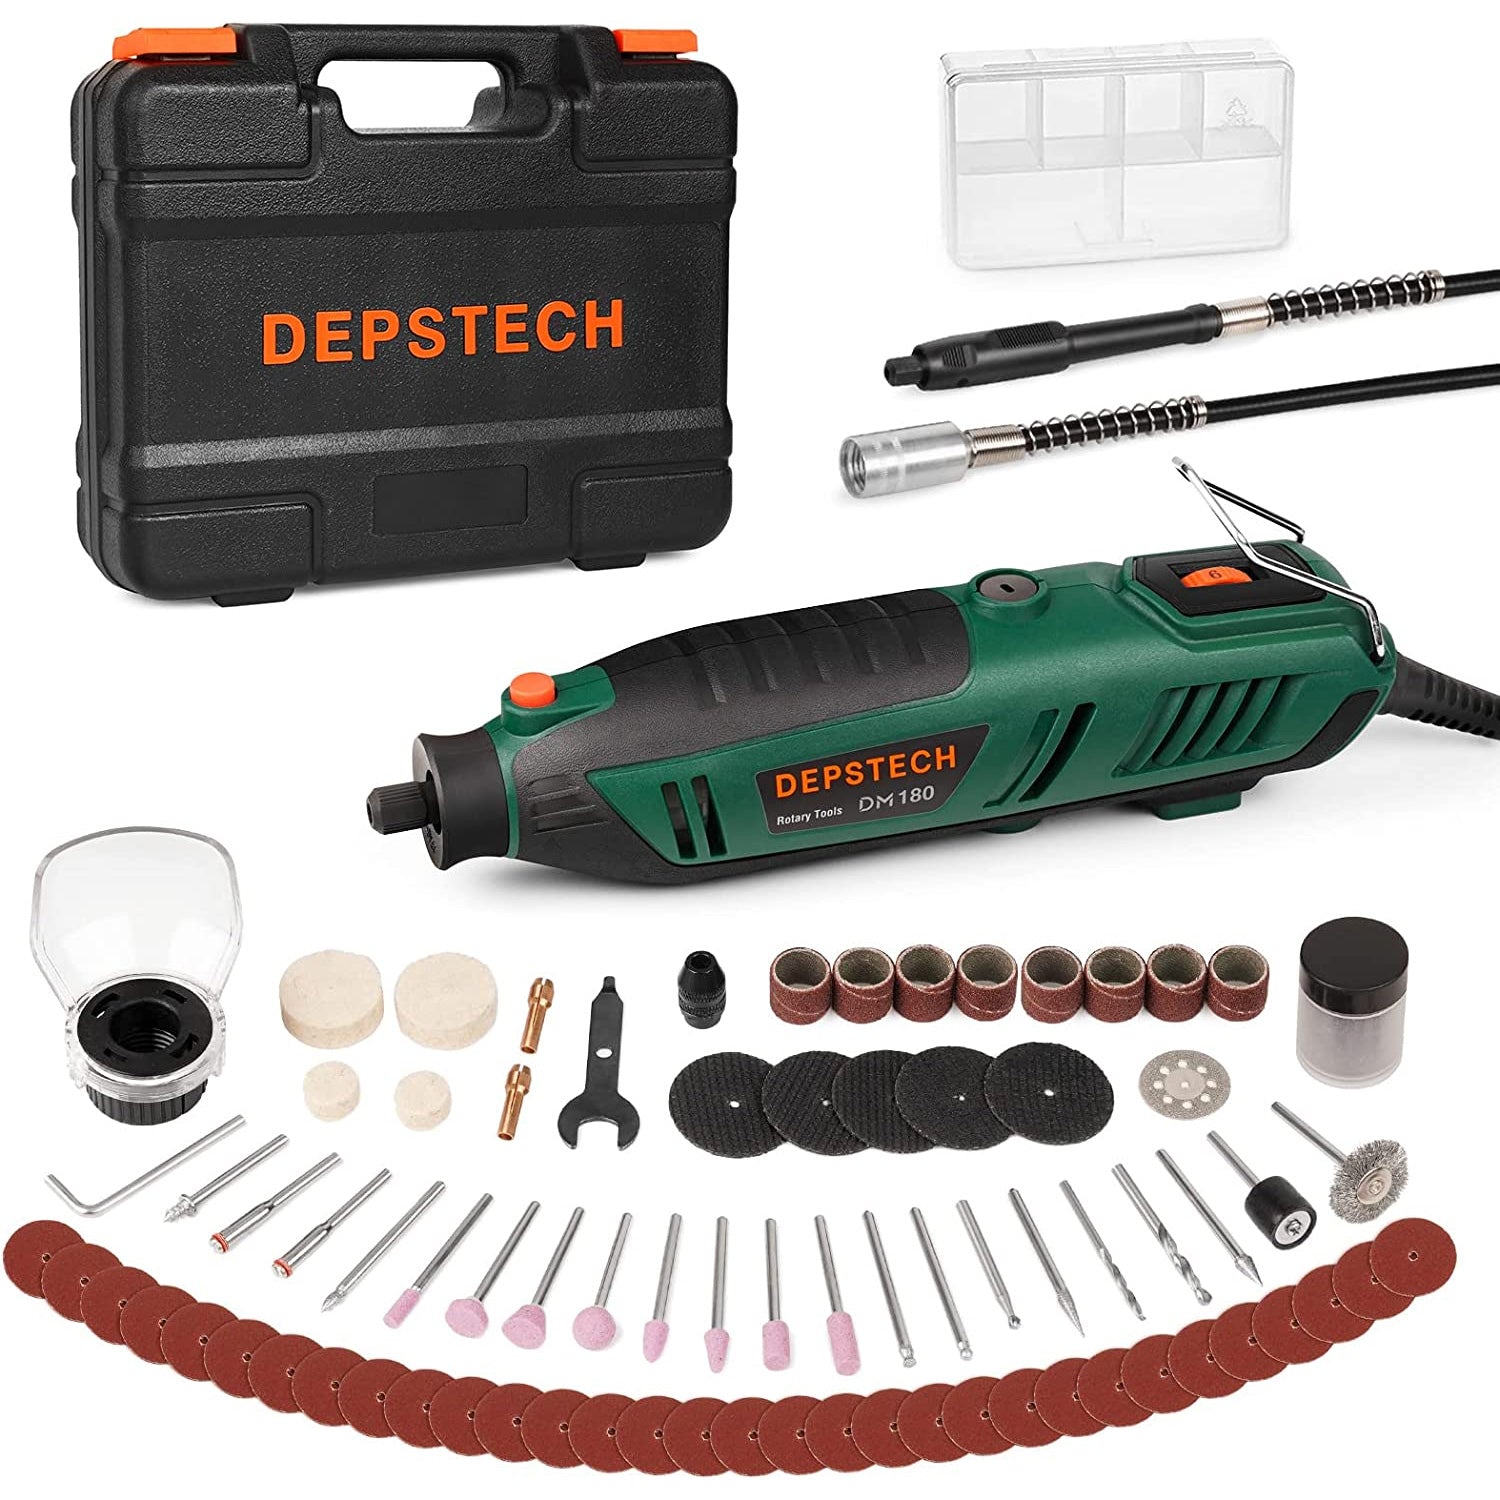 DEPSTECH A1L Cordless Rotary Tool Kit for DIY Crafts